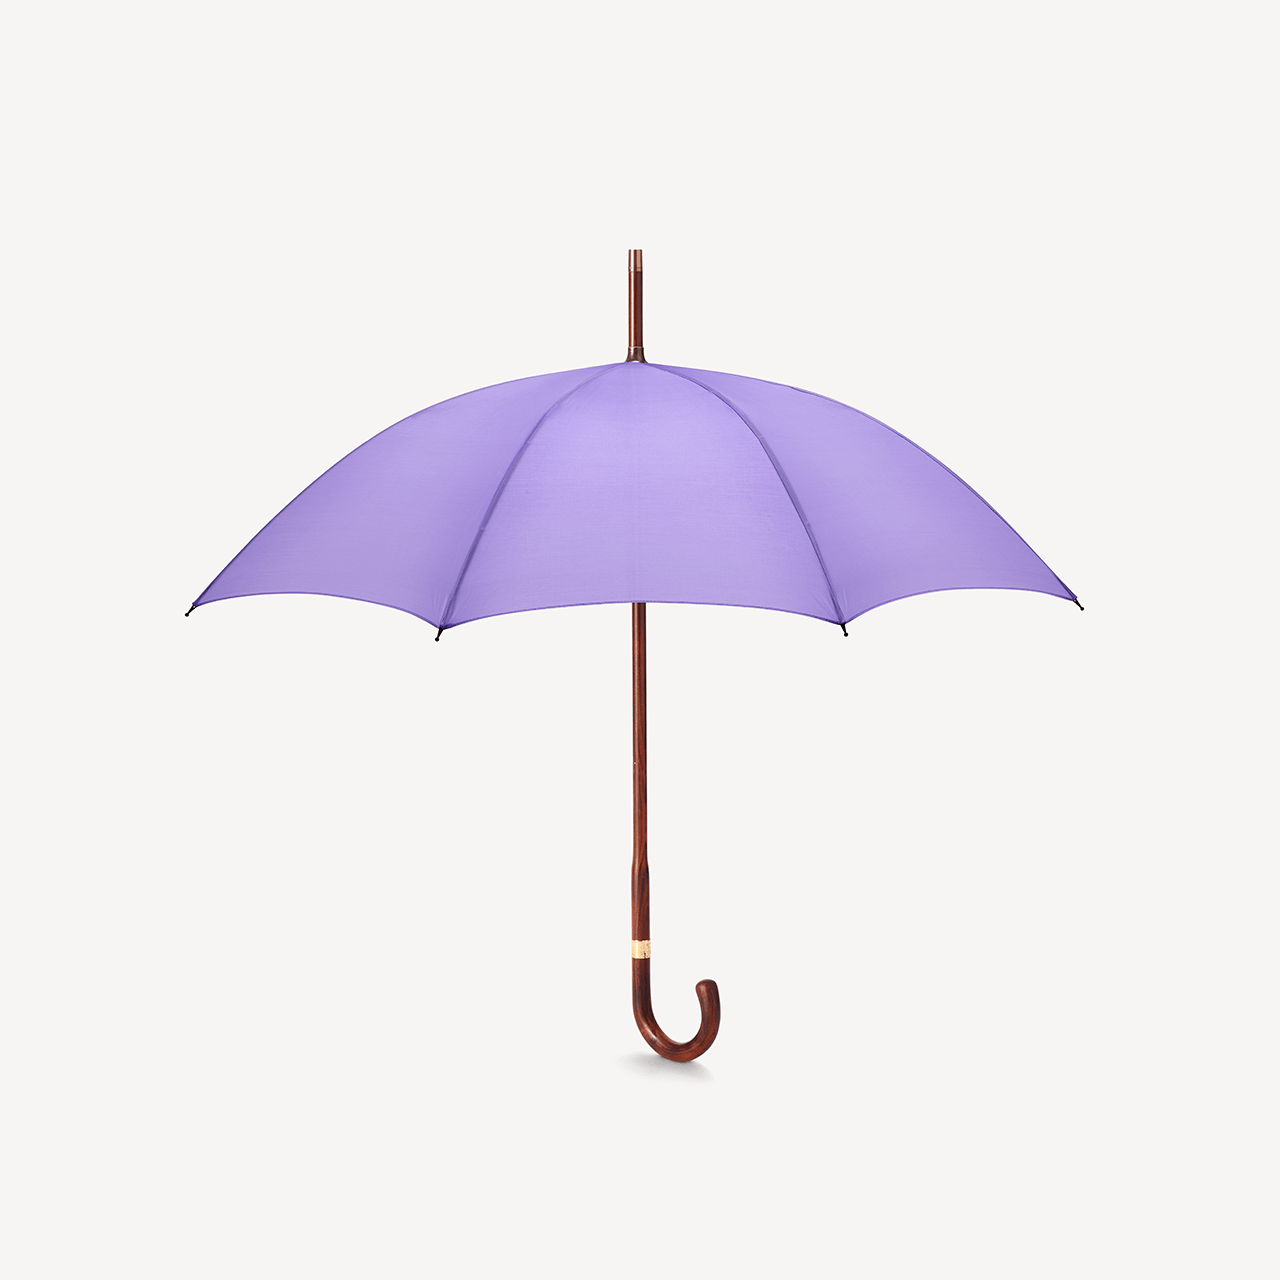 Stripped Cherry Umbrella for Women - Lilac - Swaine